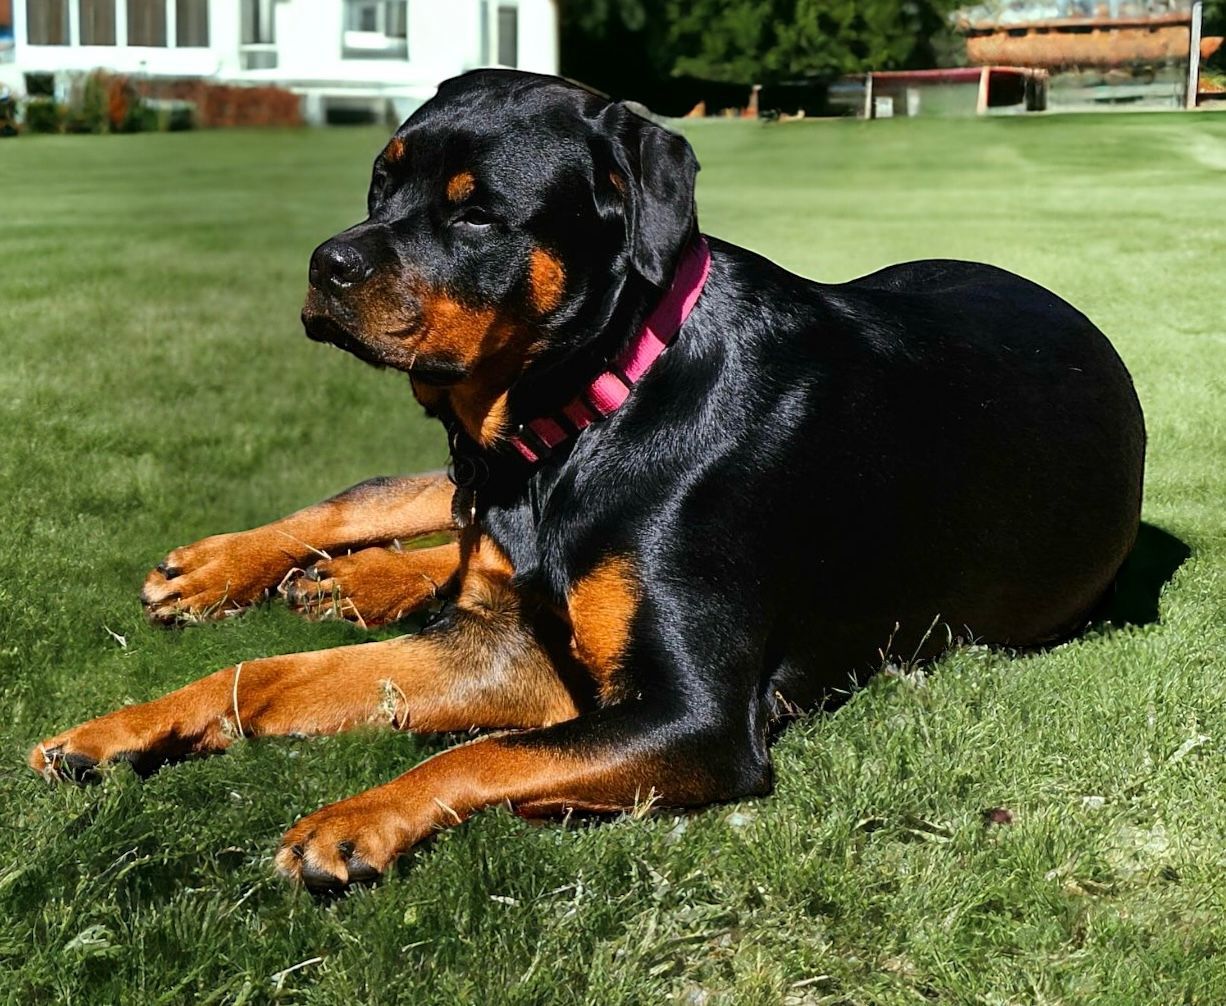 Female Rottweiler relaxing on a cot